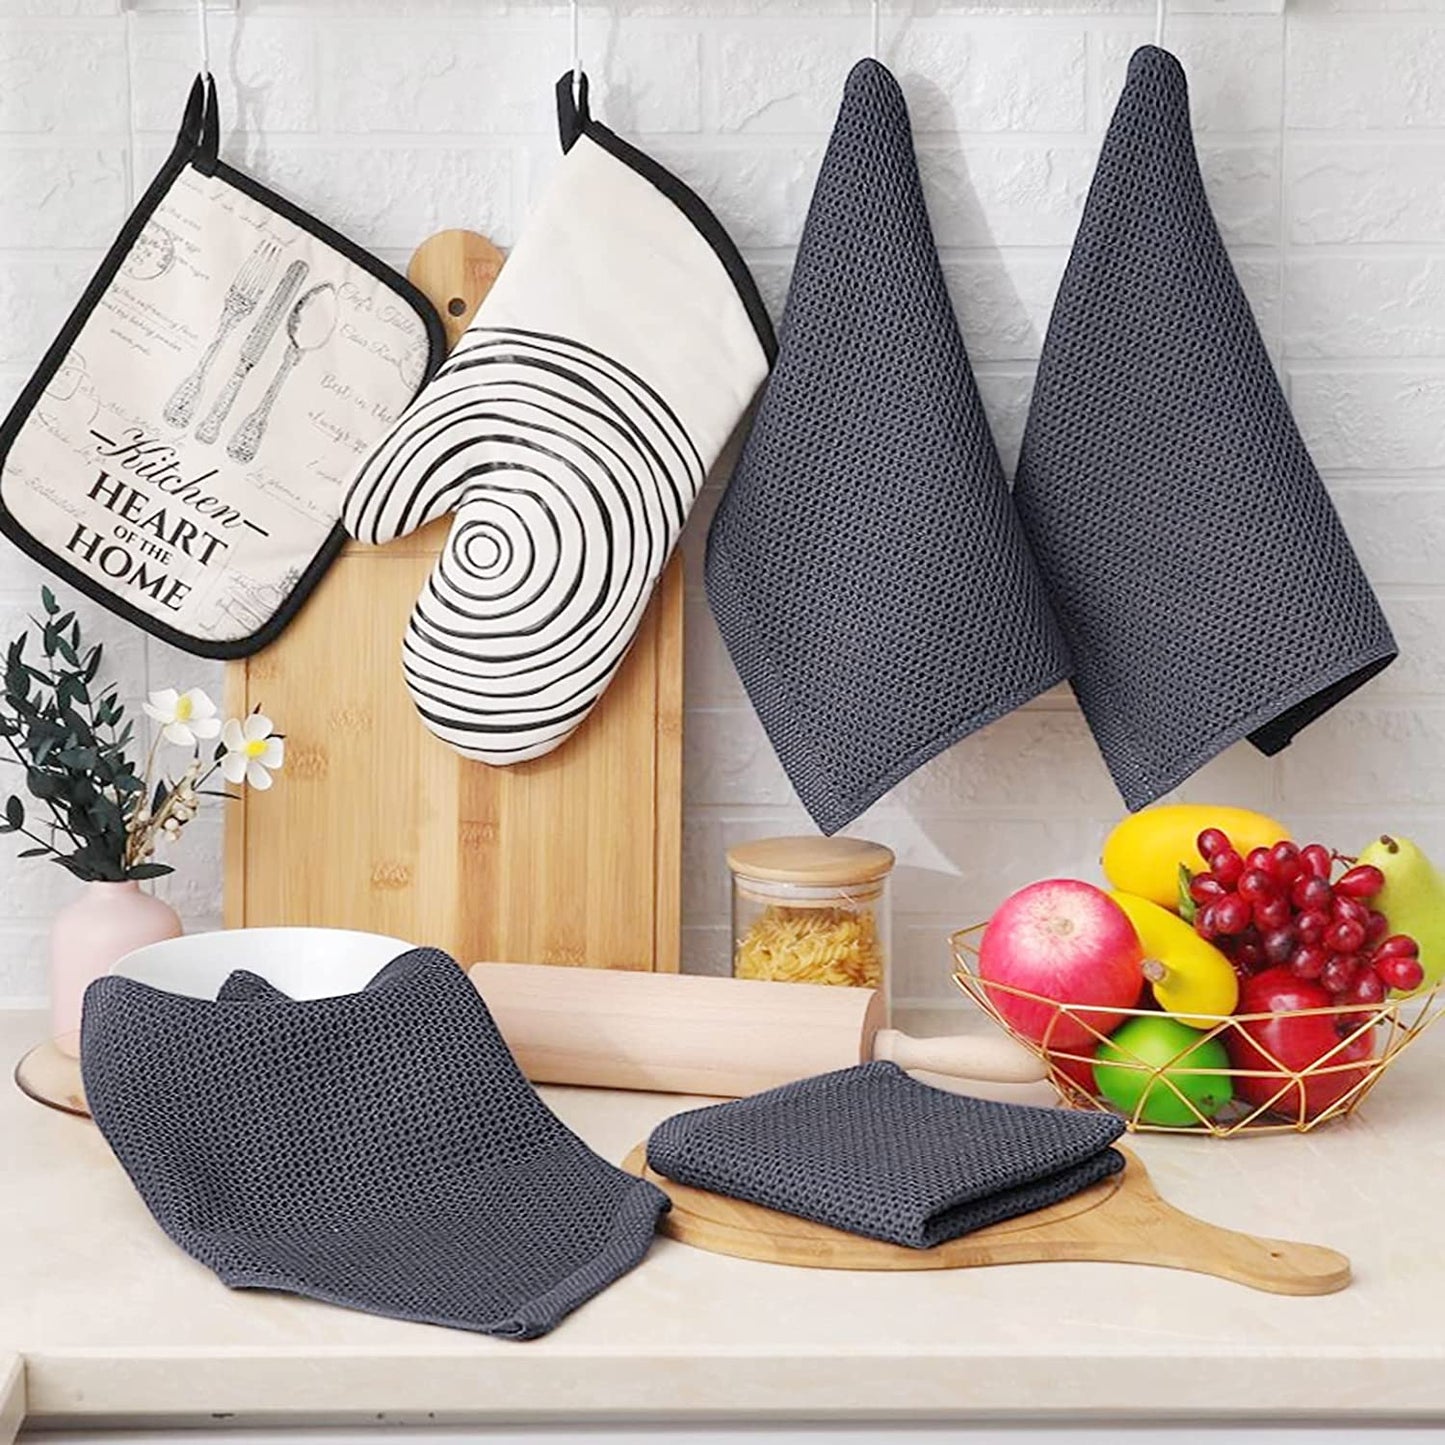 100% Cotton Waffle Weave Kitchen Dish Cloths, Ultra Soft Absorbent Quick Drying Dish Towels, 12x12 Inches, 6-Pack, Dark Grey